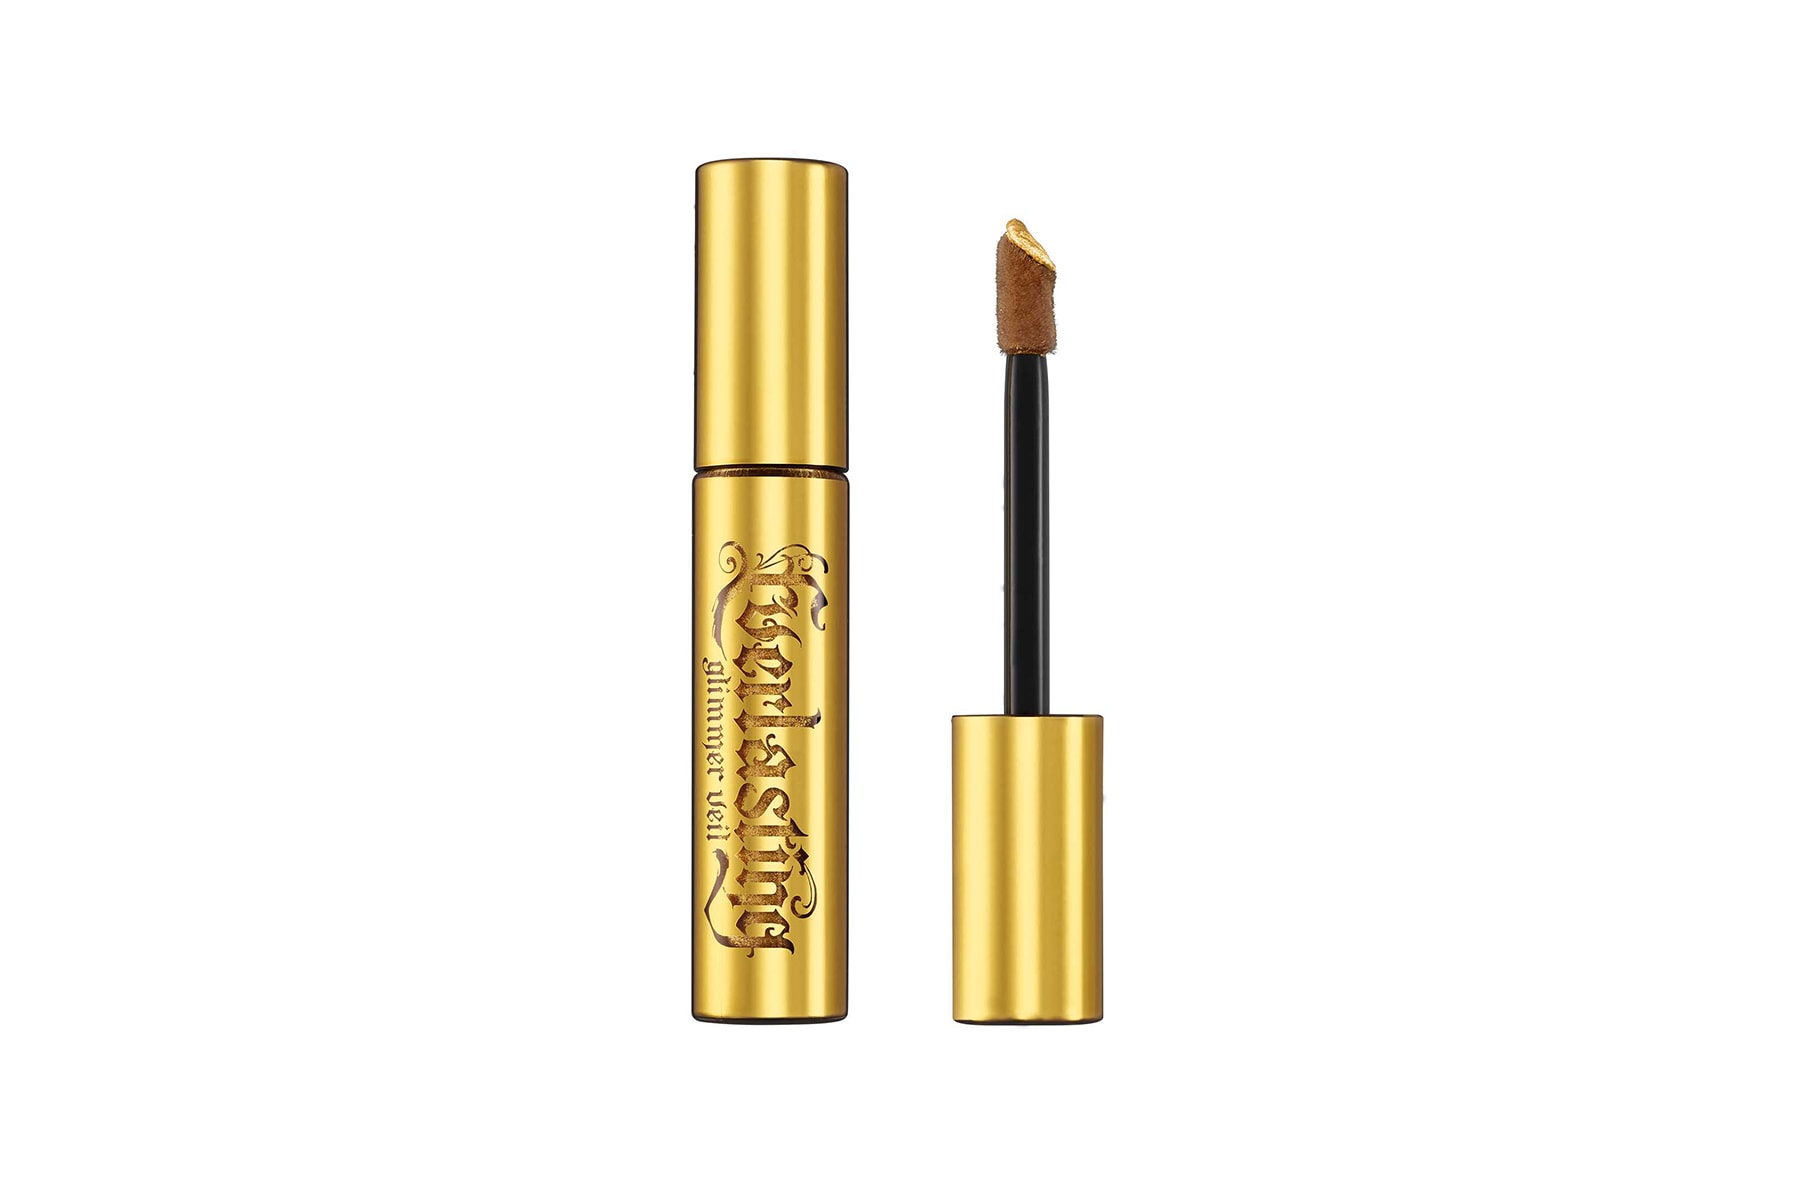 kat von d beauty 10 year anniversary makeup collection lipstick lip gloss stain gold tube